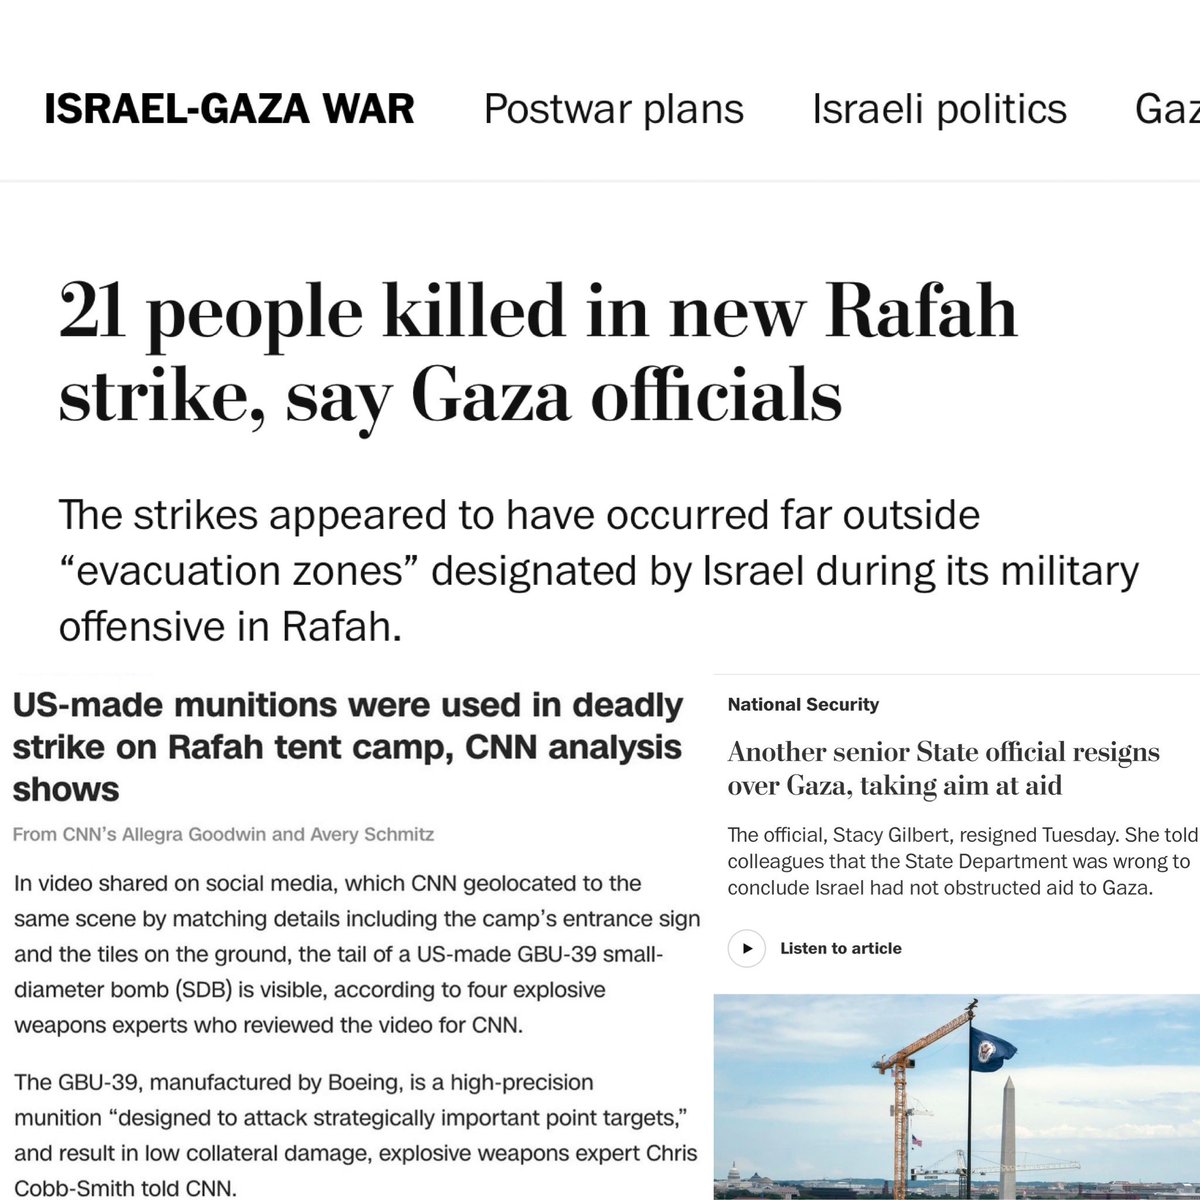 “21 killed in new Rafah strike… CNN says 🇺🇸-made munitions were used (manufactured by Boeing) in the previous one… senior state official resigns over @StateDept claims 🇮🇱 had not obstructed aid to Gaza…” wapo.st/3UZ86ug